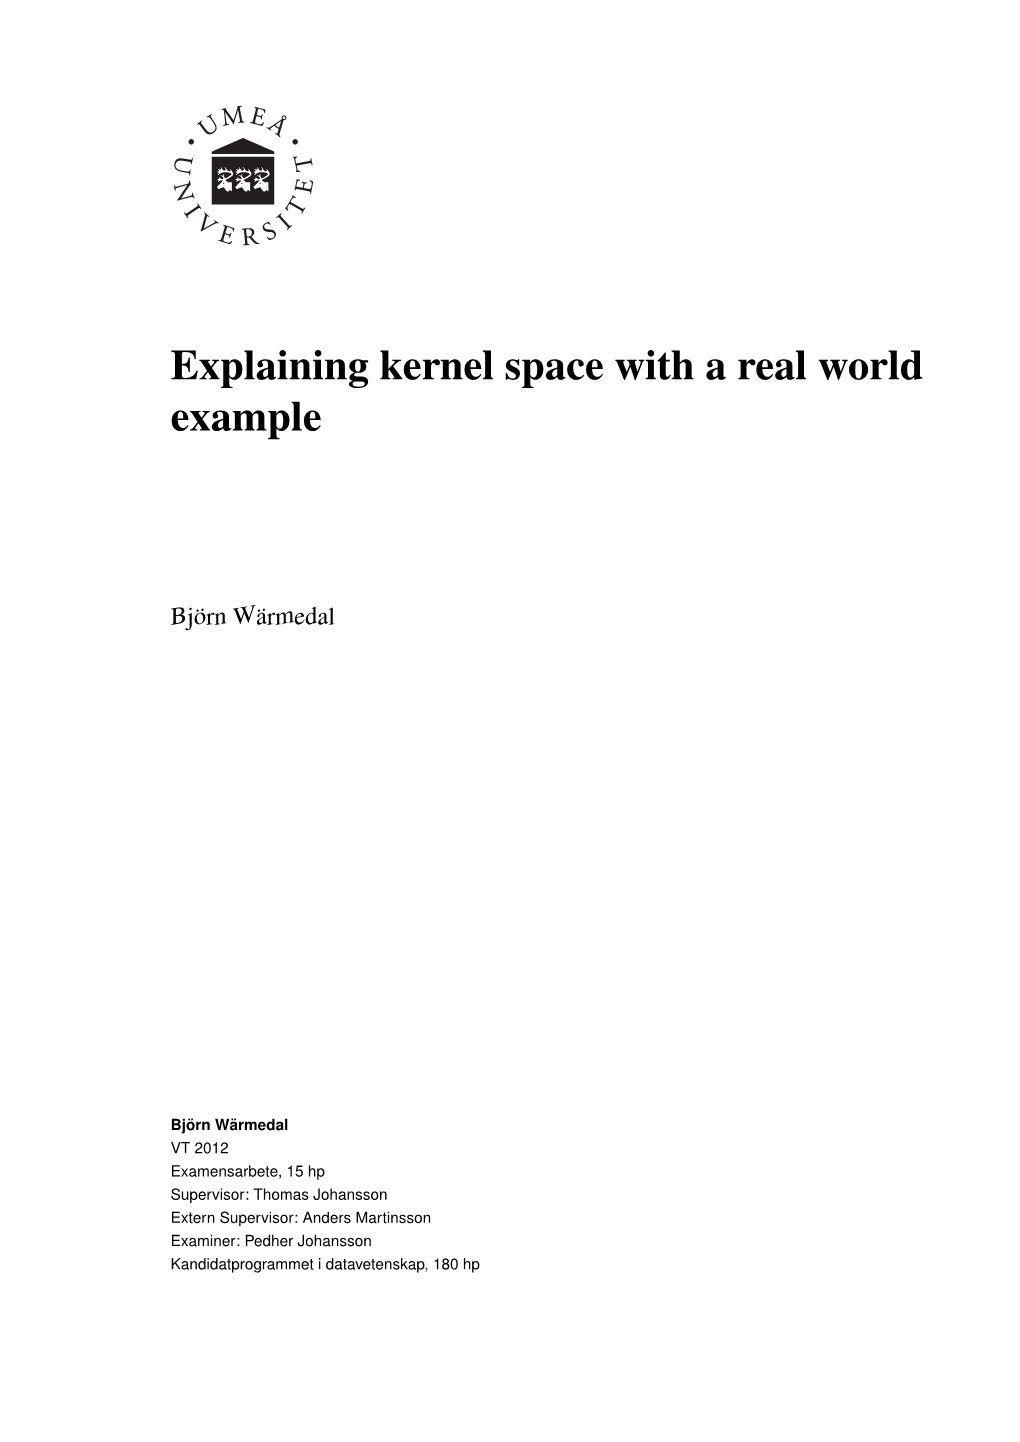 Explaining Kernel Space with a Real World Example